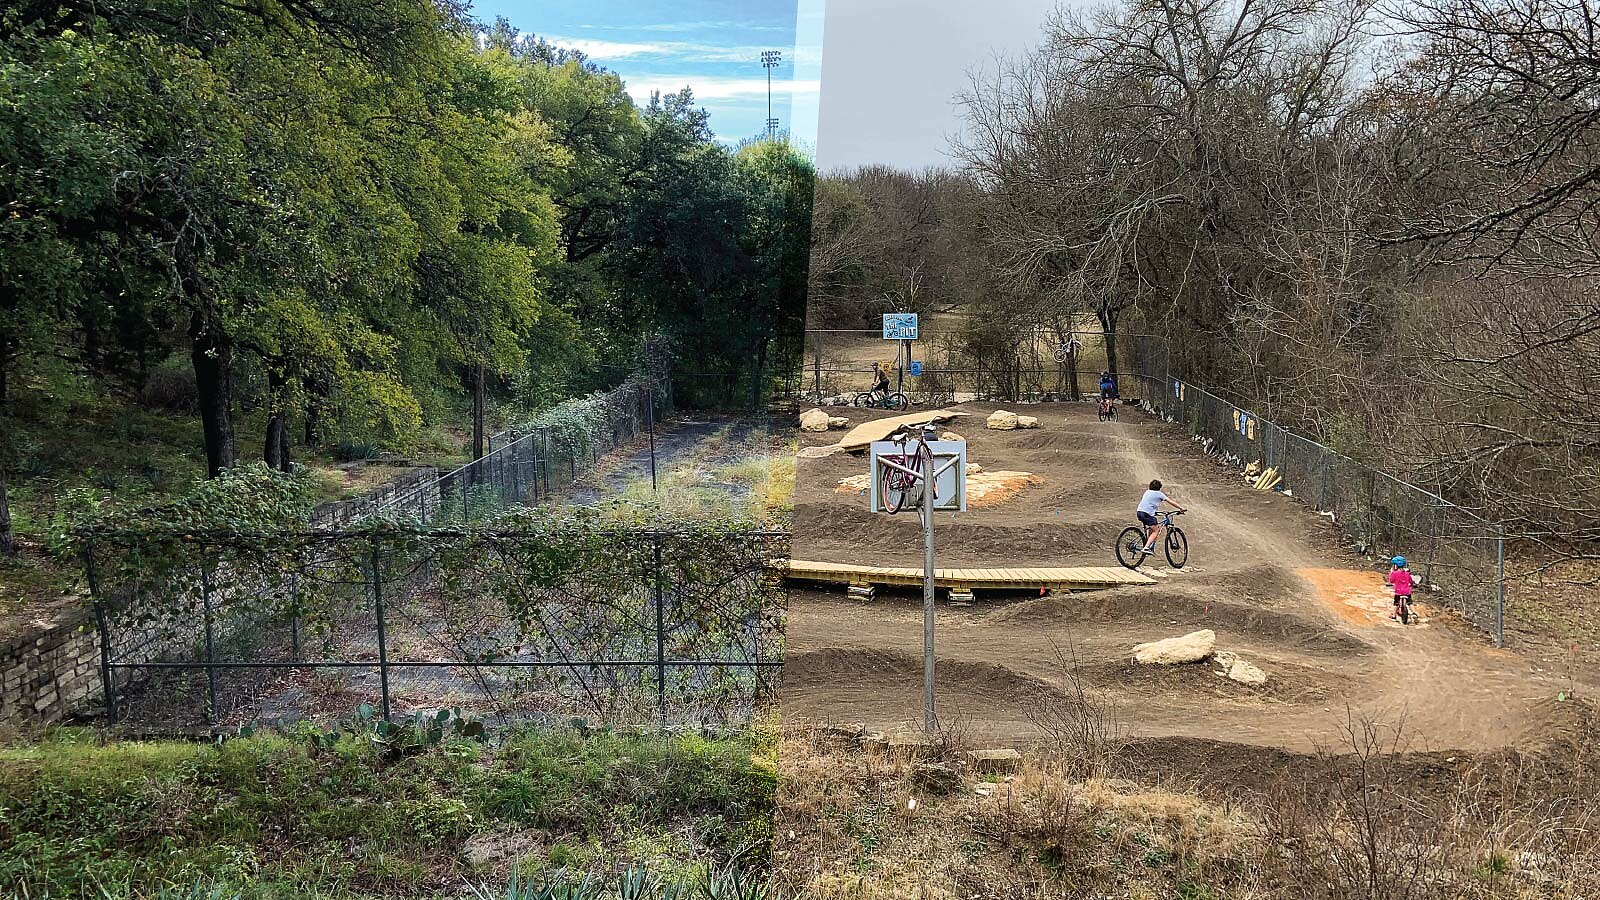 Before and after photo shows the amazing potential of pumptrack bike parks!